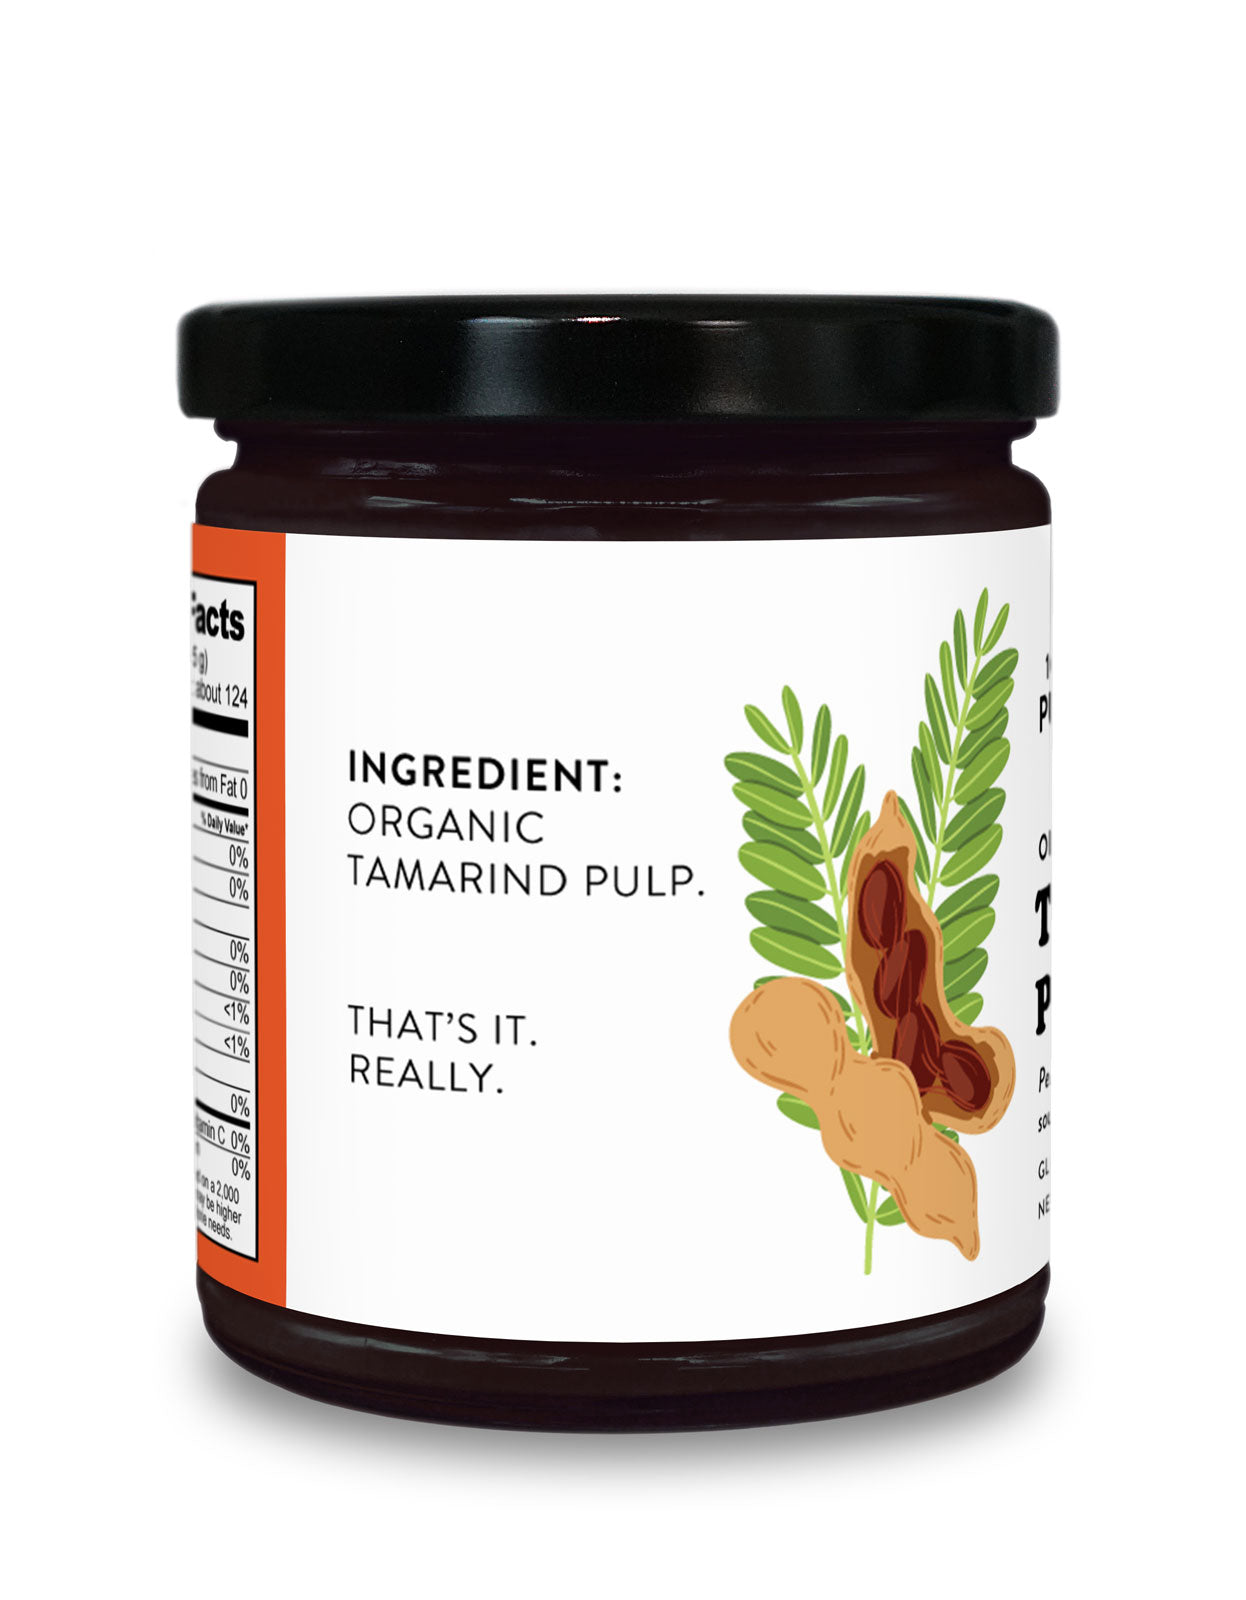 Jar of our organic Tamarind concentrate. Ingredients Label reads: "Ingredient: Organic Tamarind Pulp. That's it. Really." We think we're clever.